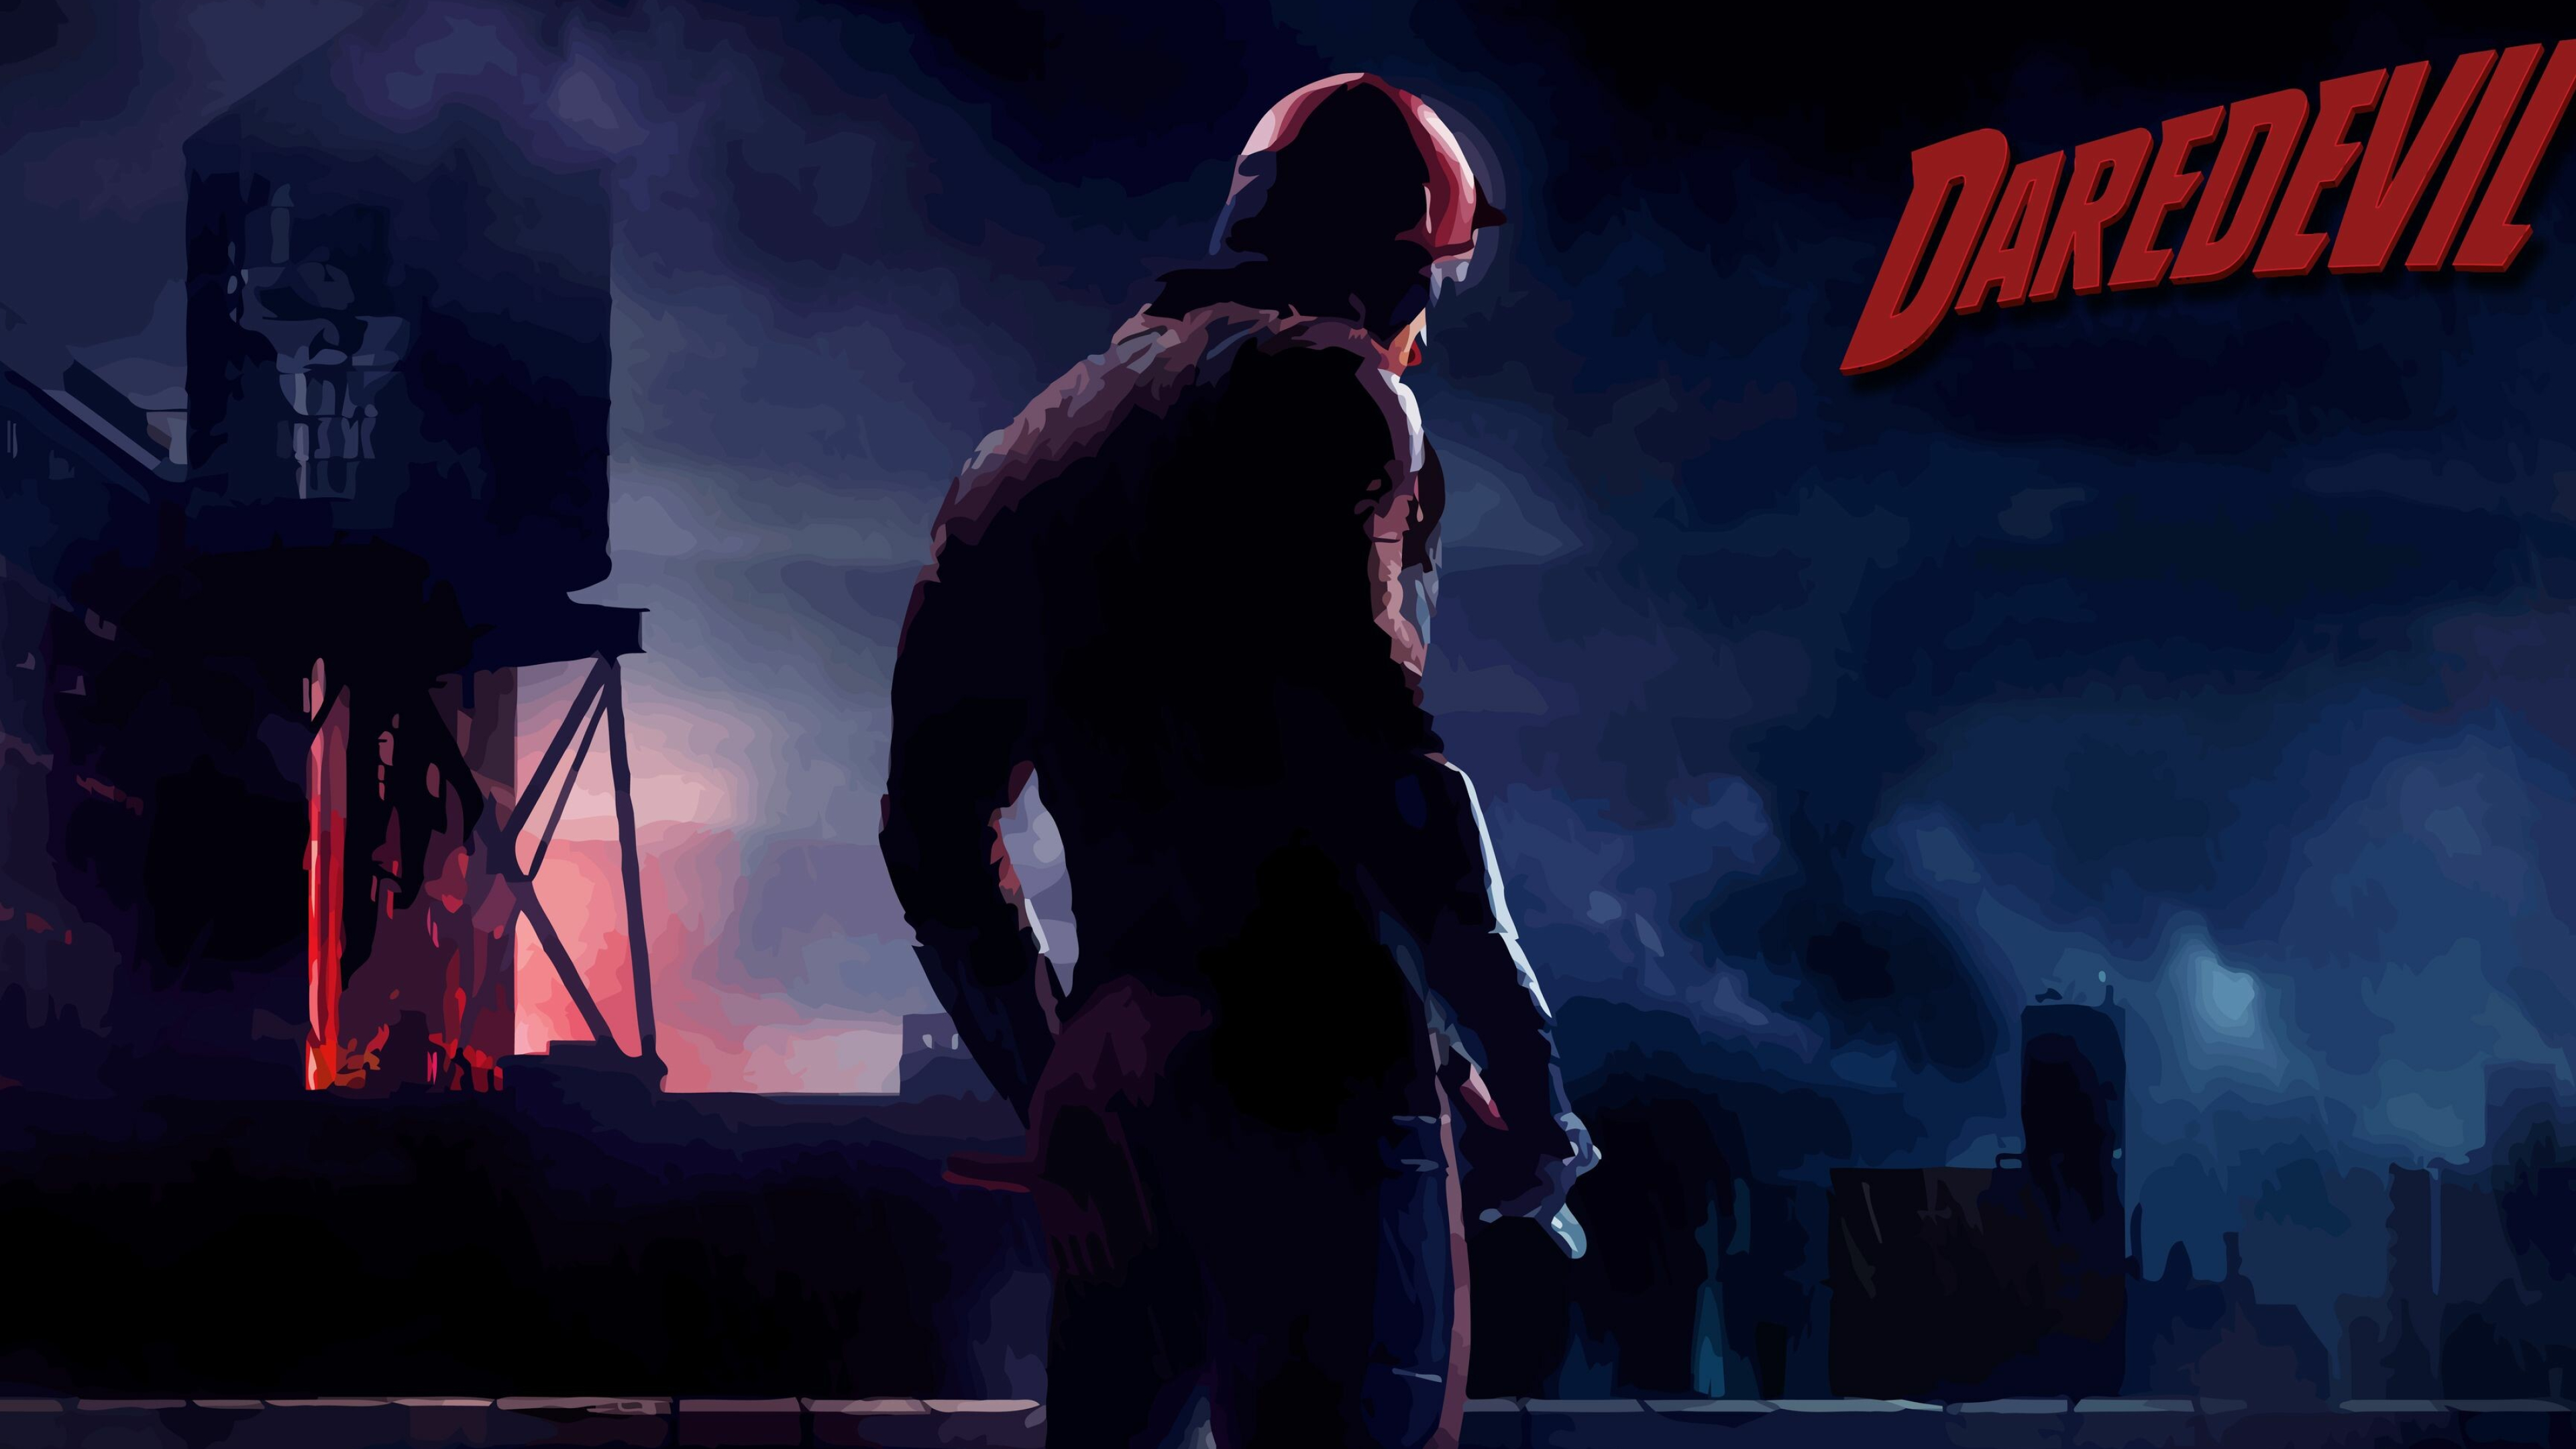 Daredevil (TV Series): Marvel, An American television show created by Drew Goddard. 3840x2160 4K Wallpaper.